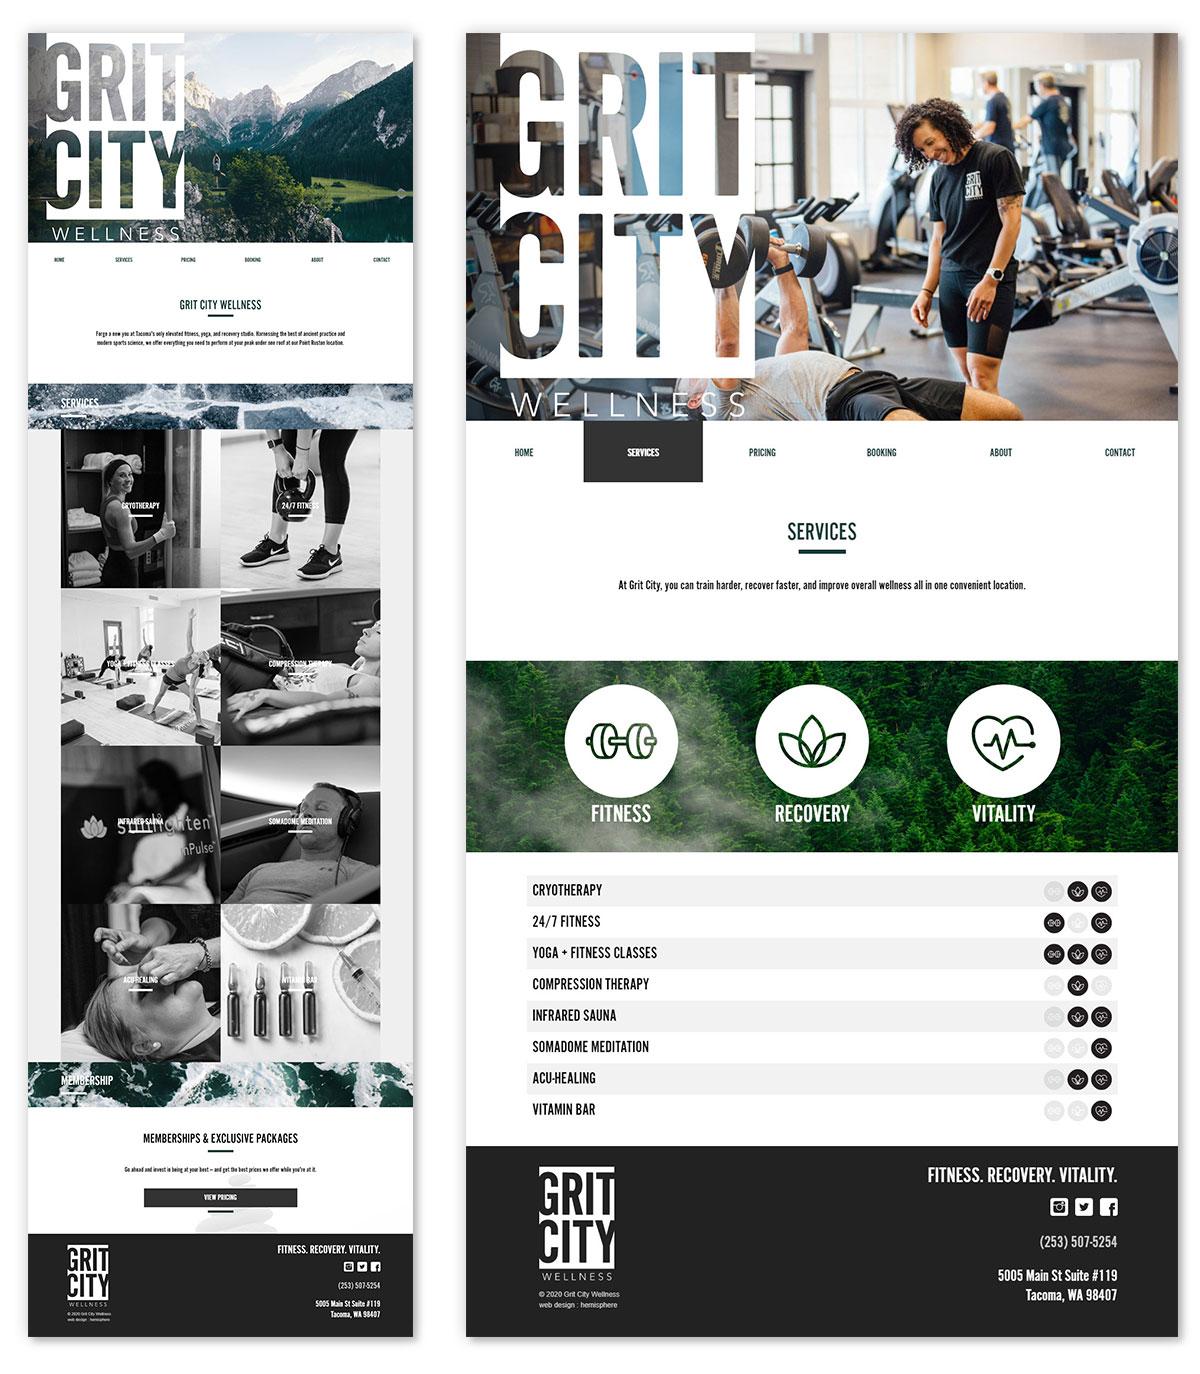 Grit City Wellness home page and Services page